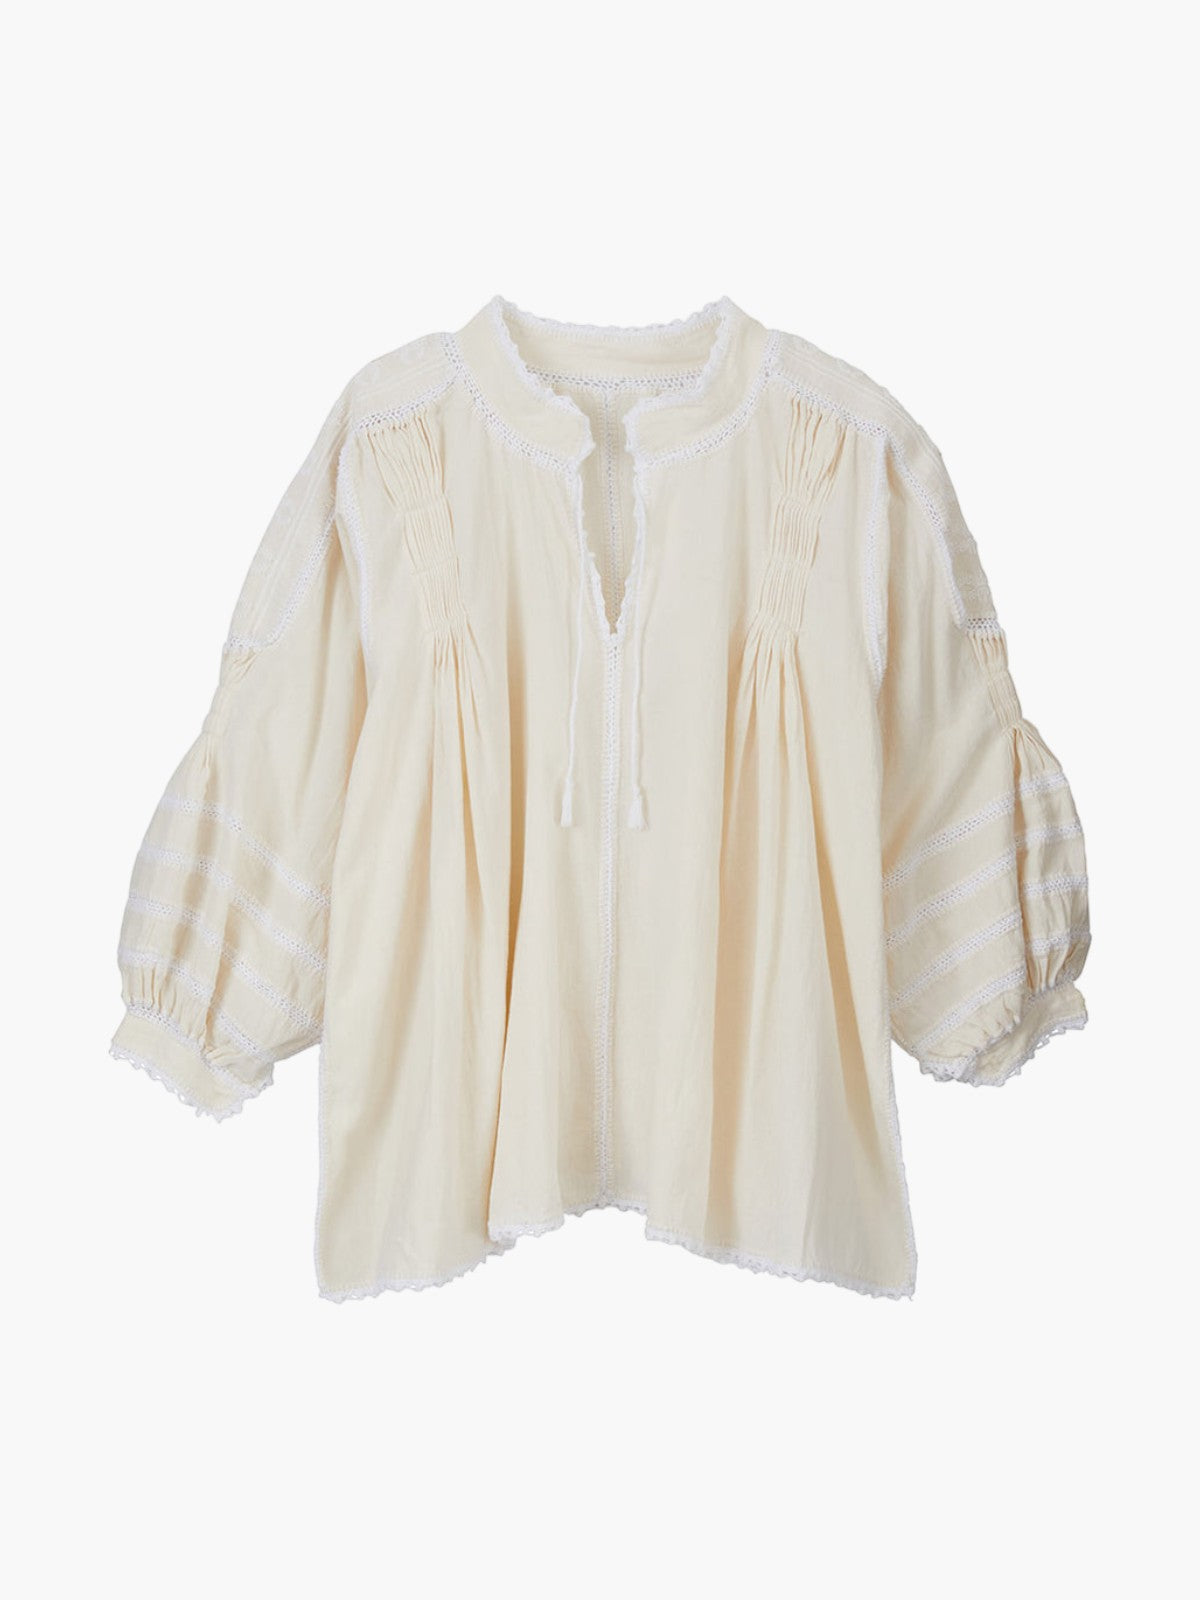 Amorcita Mexican Top | Ivory/White